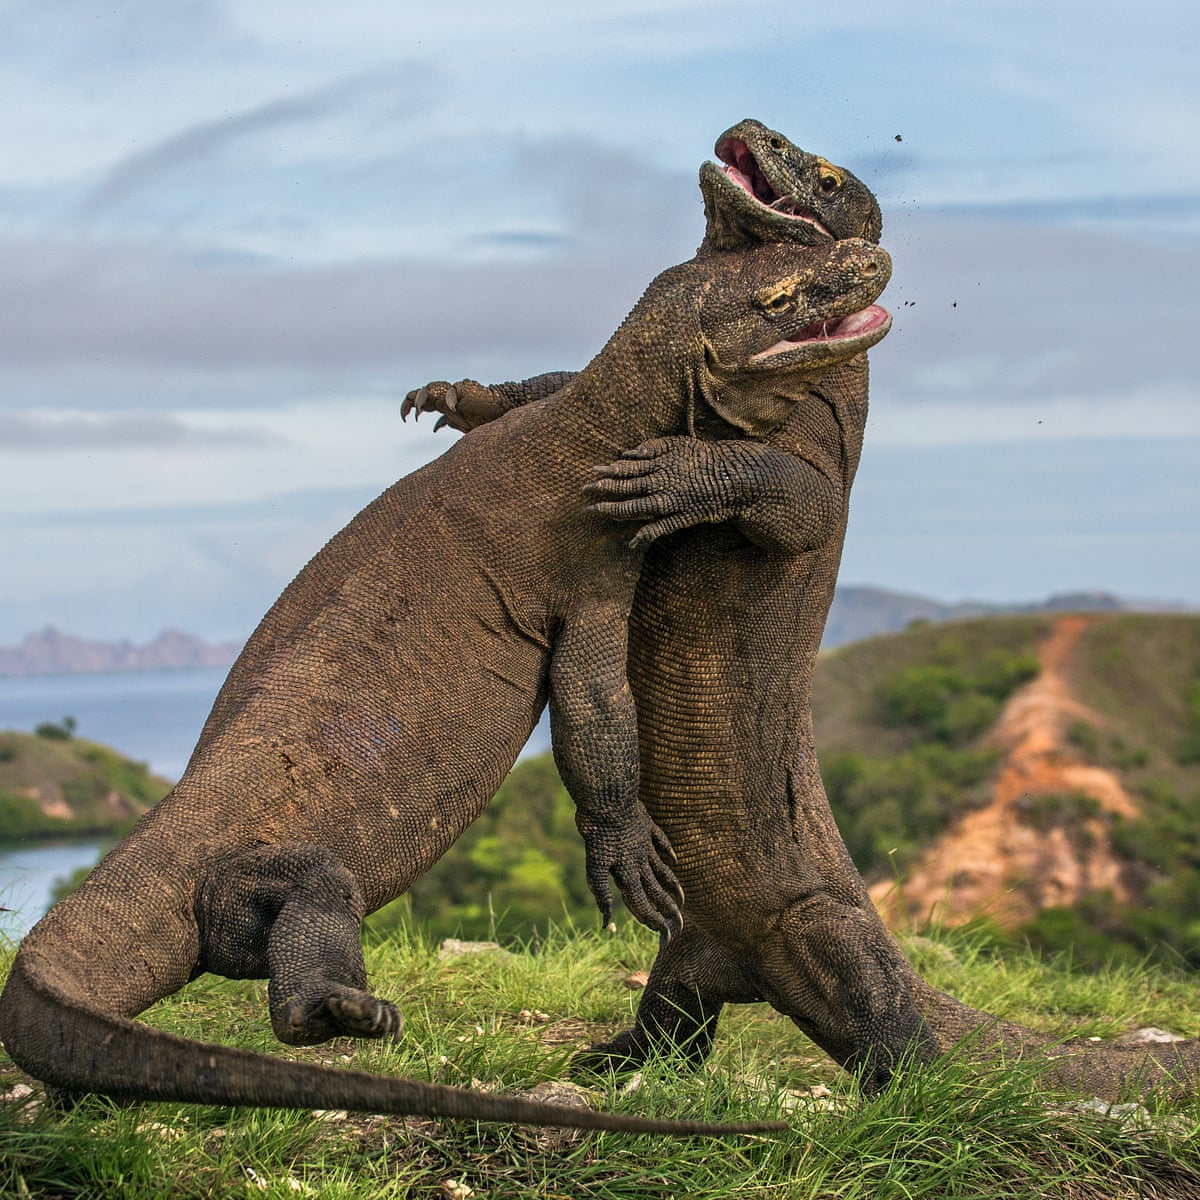 Indonesia cancels Komodo island closure, saying tourists are no threat to dragons | Indonesia | The Guardian